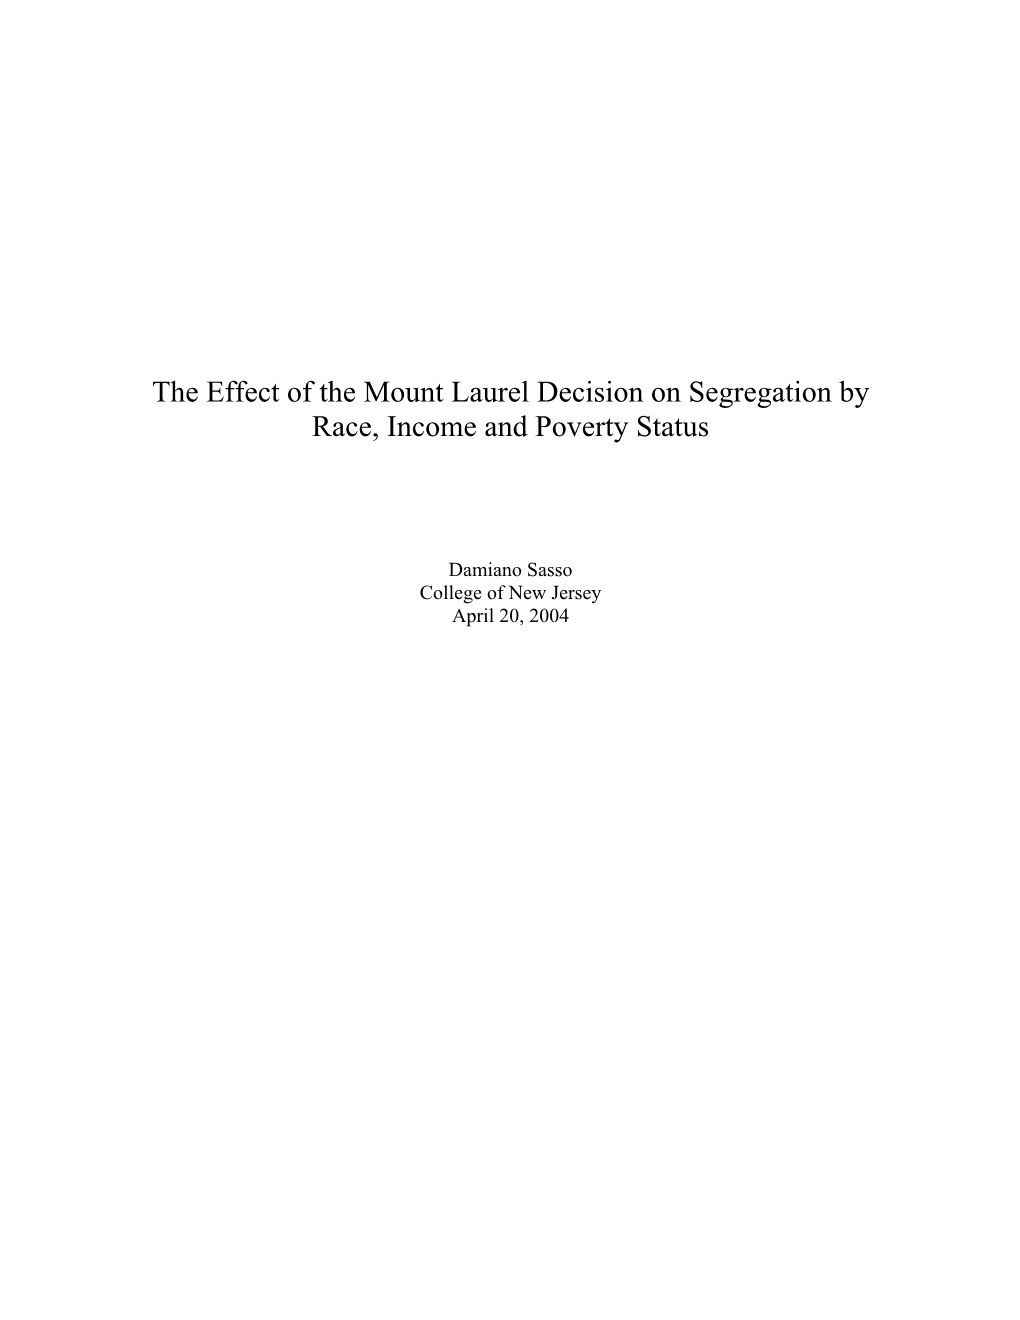 The Effect of the Mount Laurel Decision on Segregation by Race, Income and Poverty Status